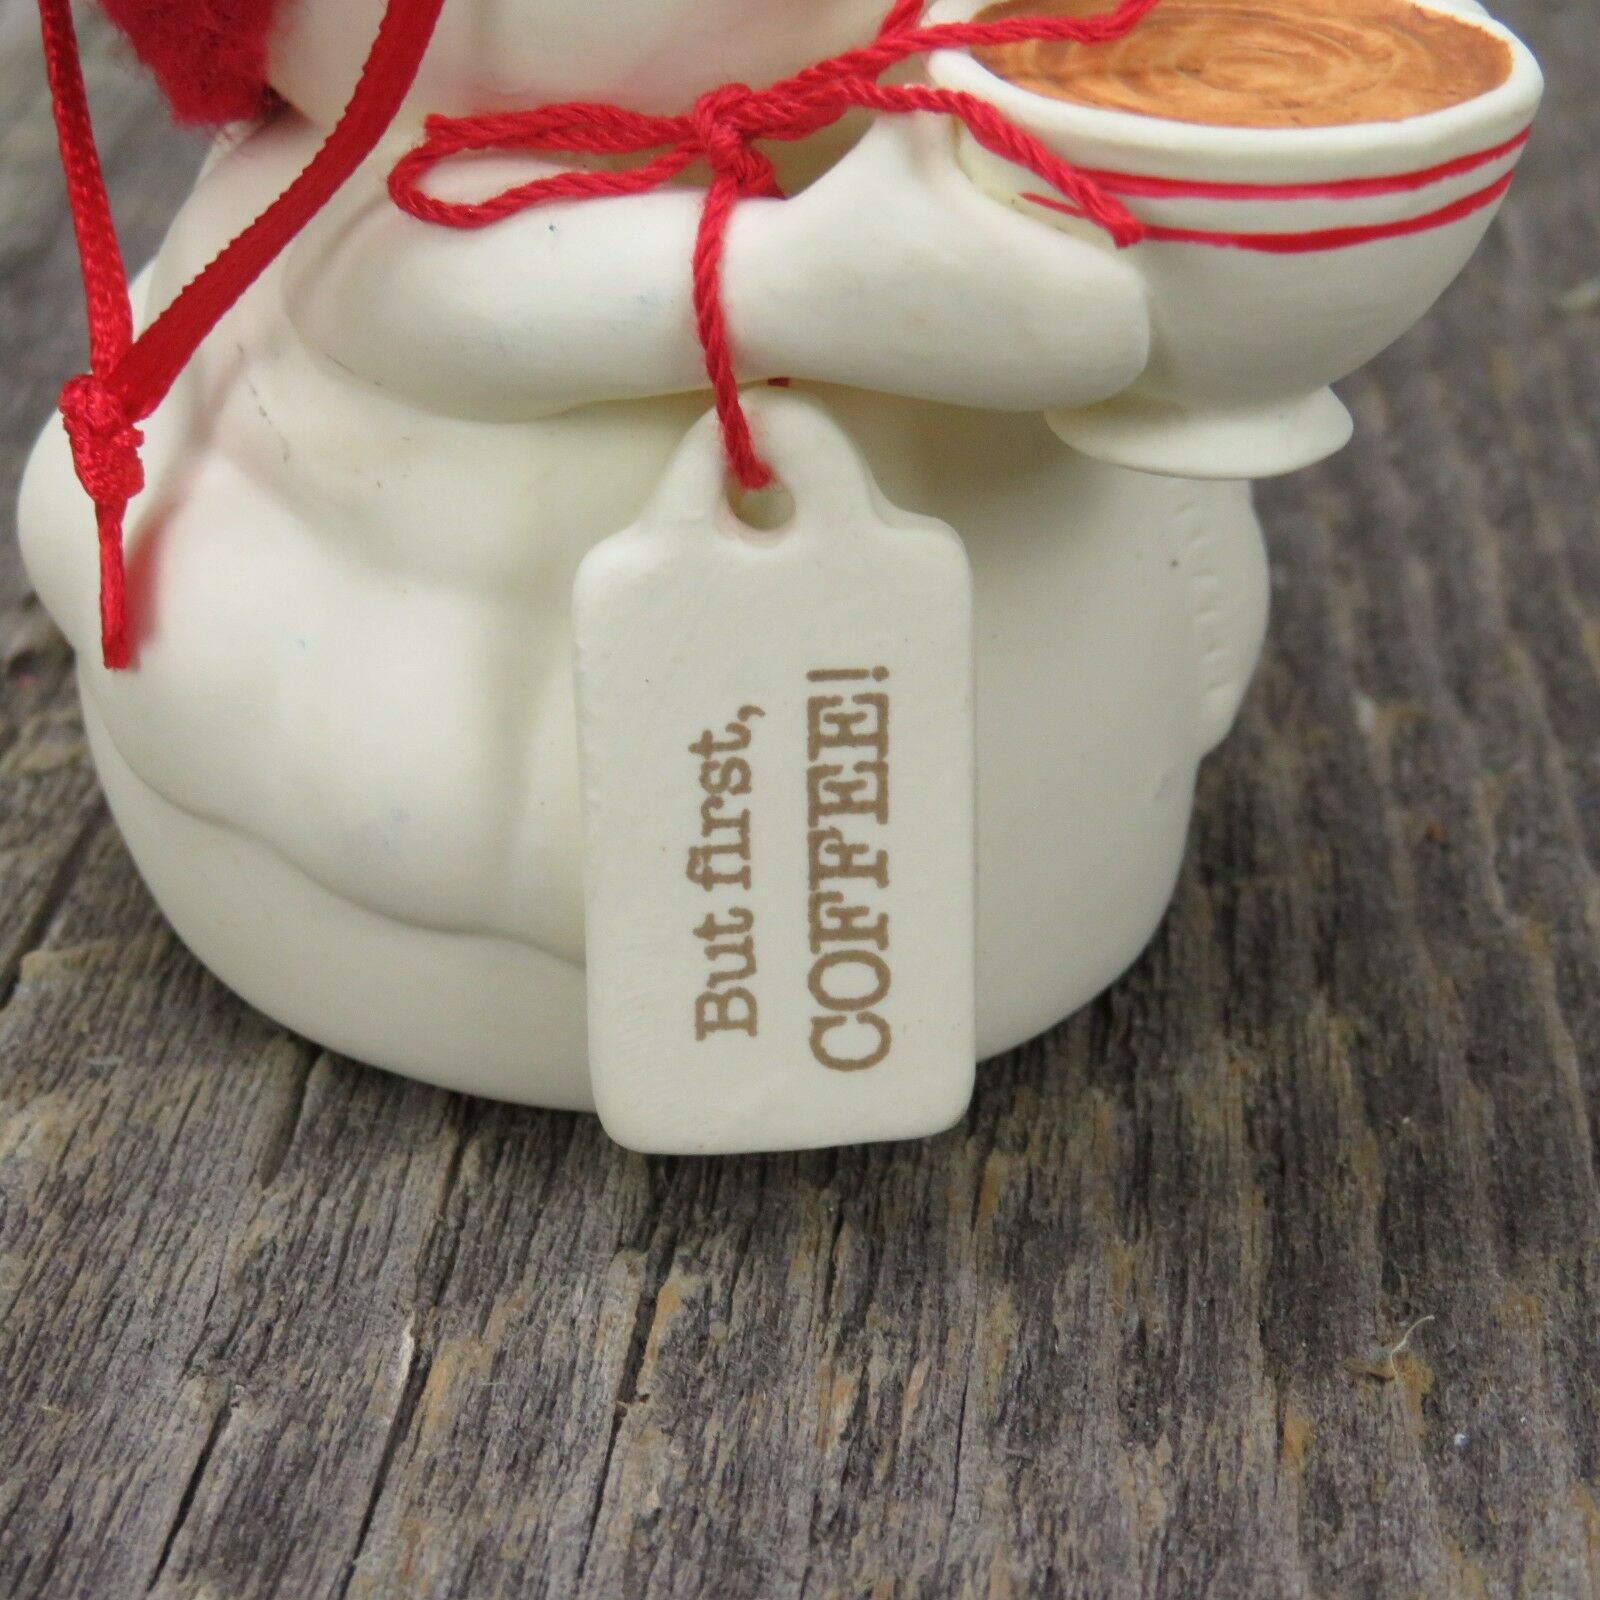 First Coffee Snowman Christmas Ornament Department 56 Bisque Porcelain Ceramic - At Grandma's Table